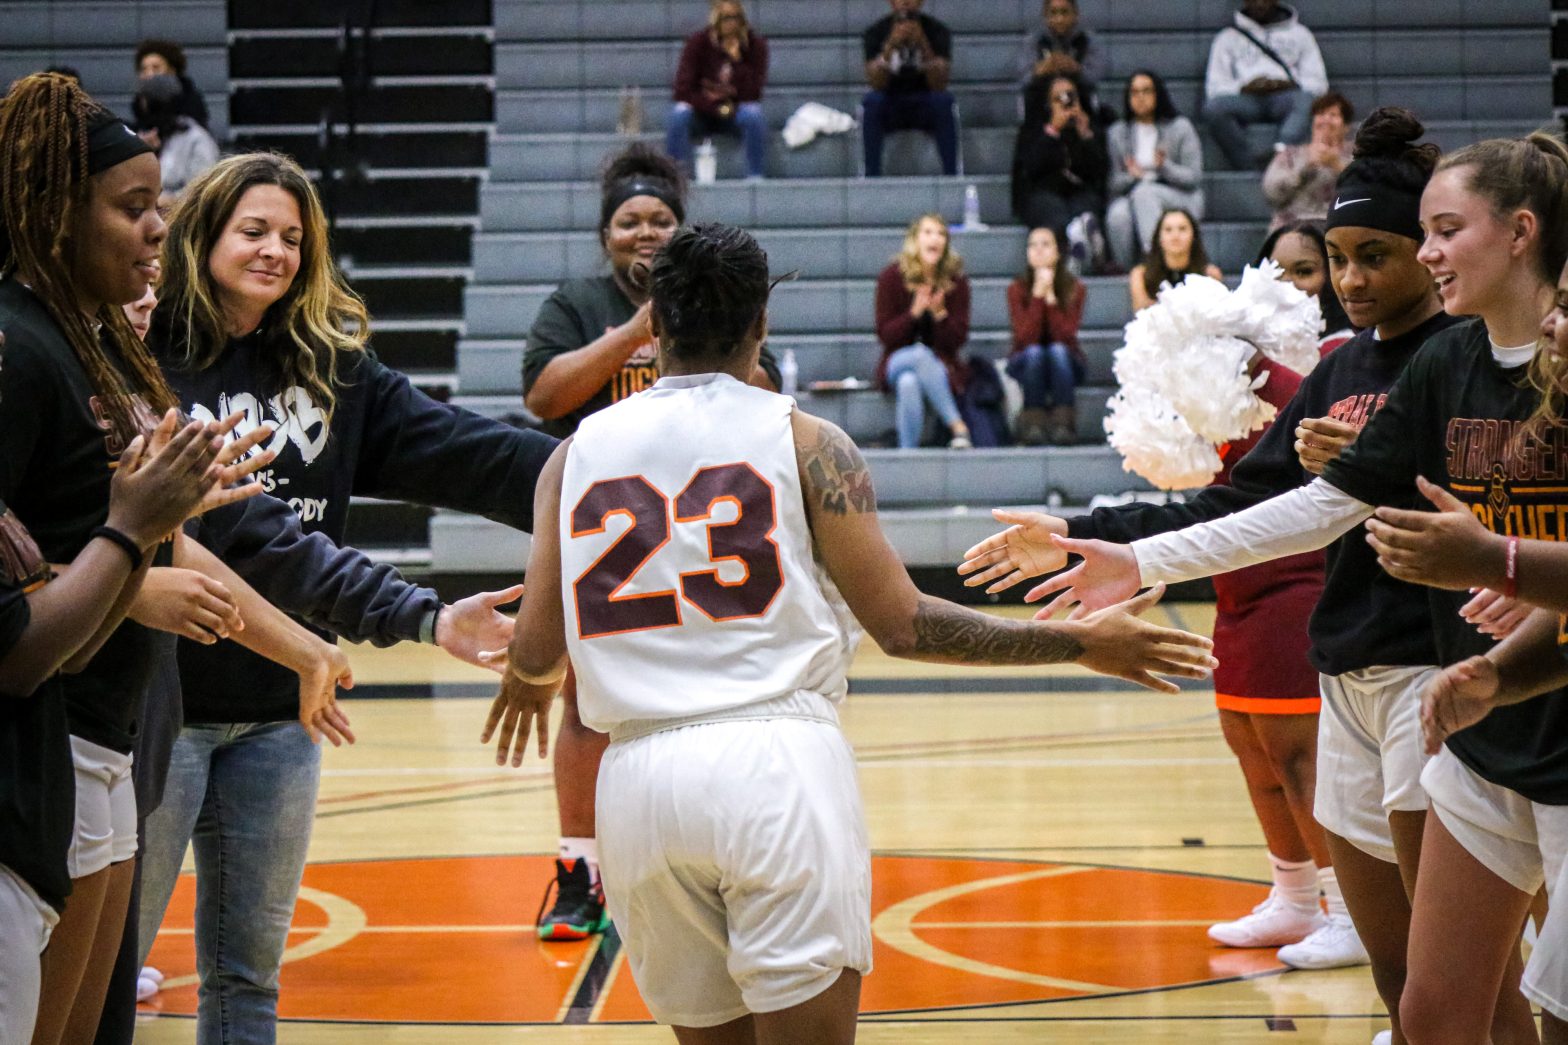 For the first time in the college’s 141-year history, the women’s basketball team at Central Penn College has received a bid to the USCAA National Championship Tournament.